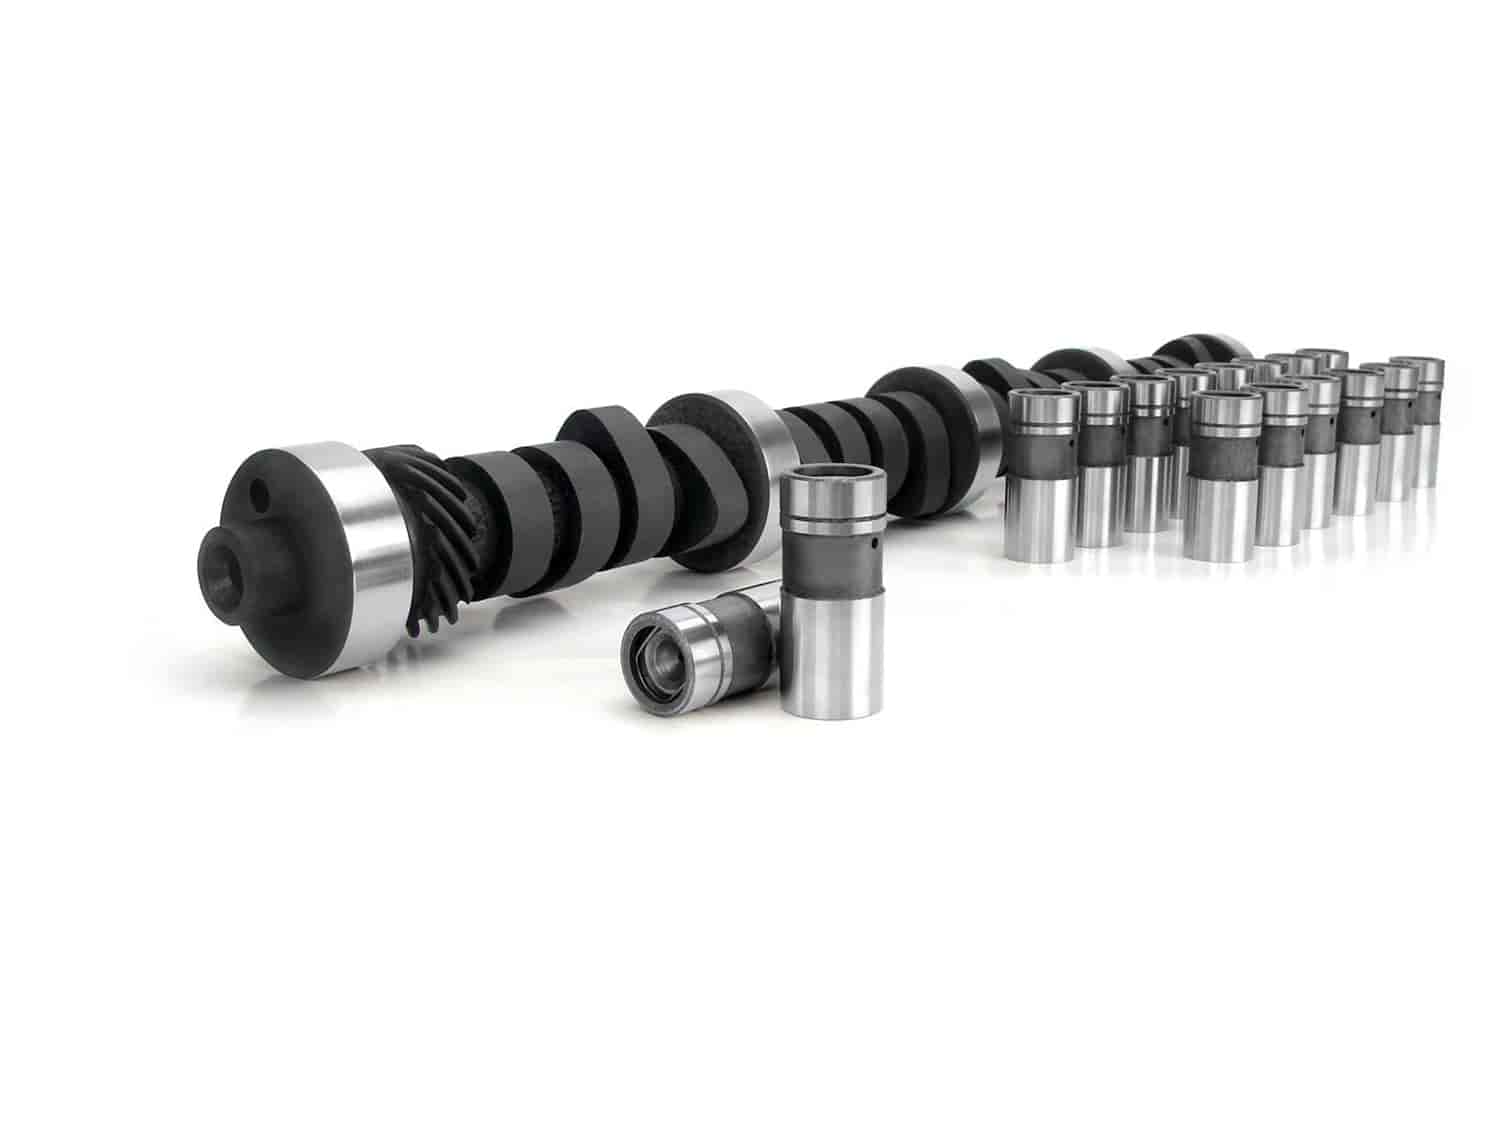 Voodoo Solid Flat Tappet Camshaft Complete Kit 1955-1998 Small Block Chevy Lift: .560" /.580"